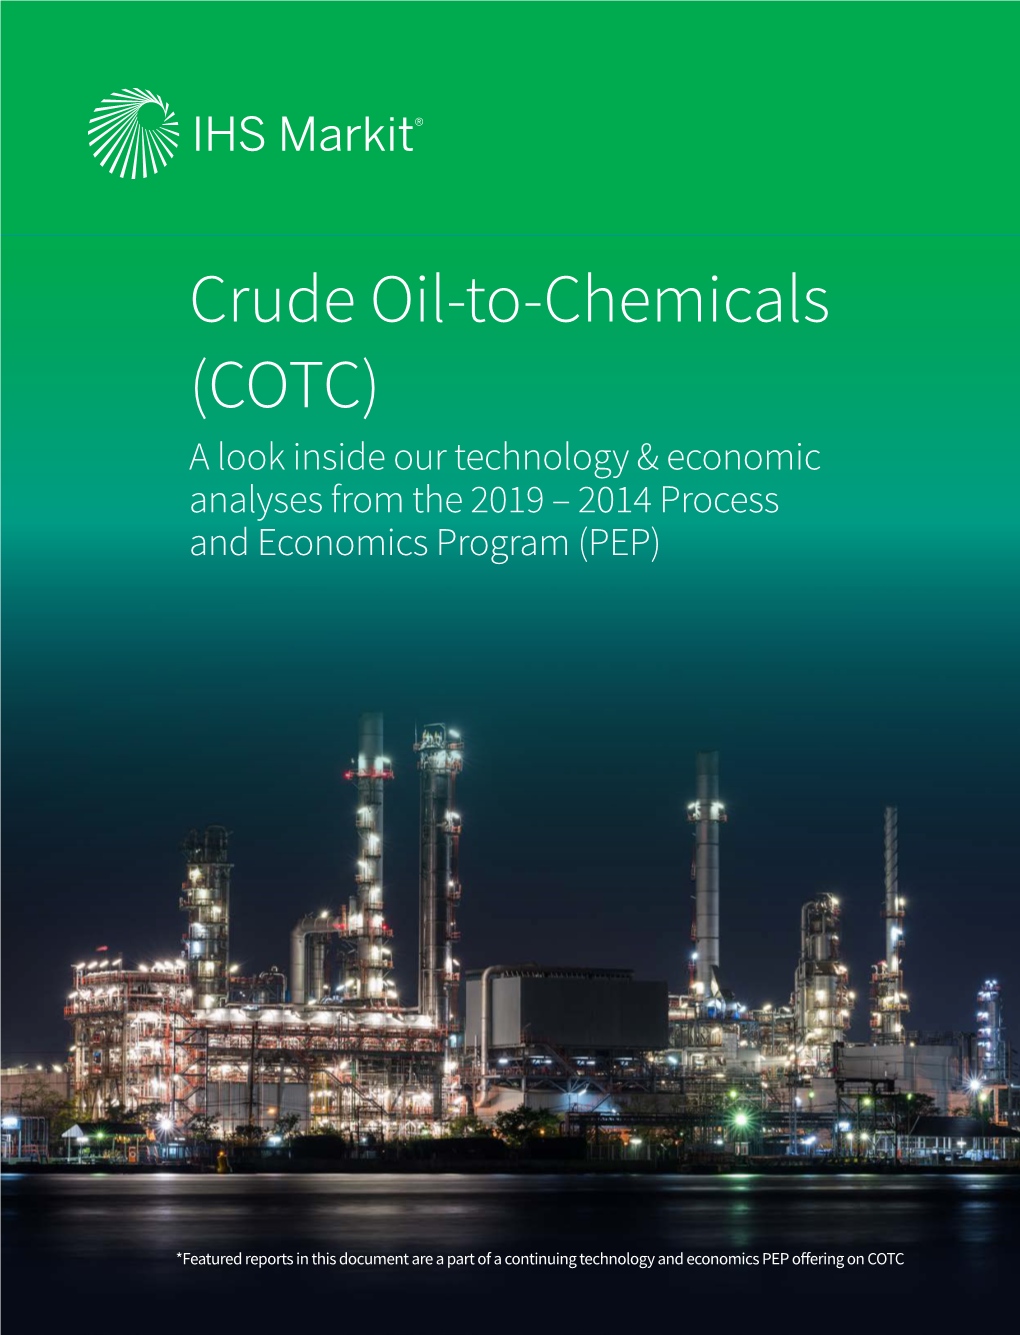 COTC) a Look Inside Our Technology & Economic Analyses from the 2019 – 2014 Process and Economics Program (PEP)